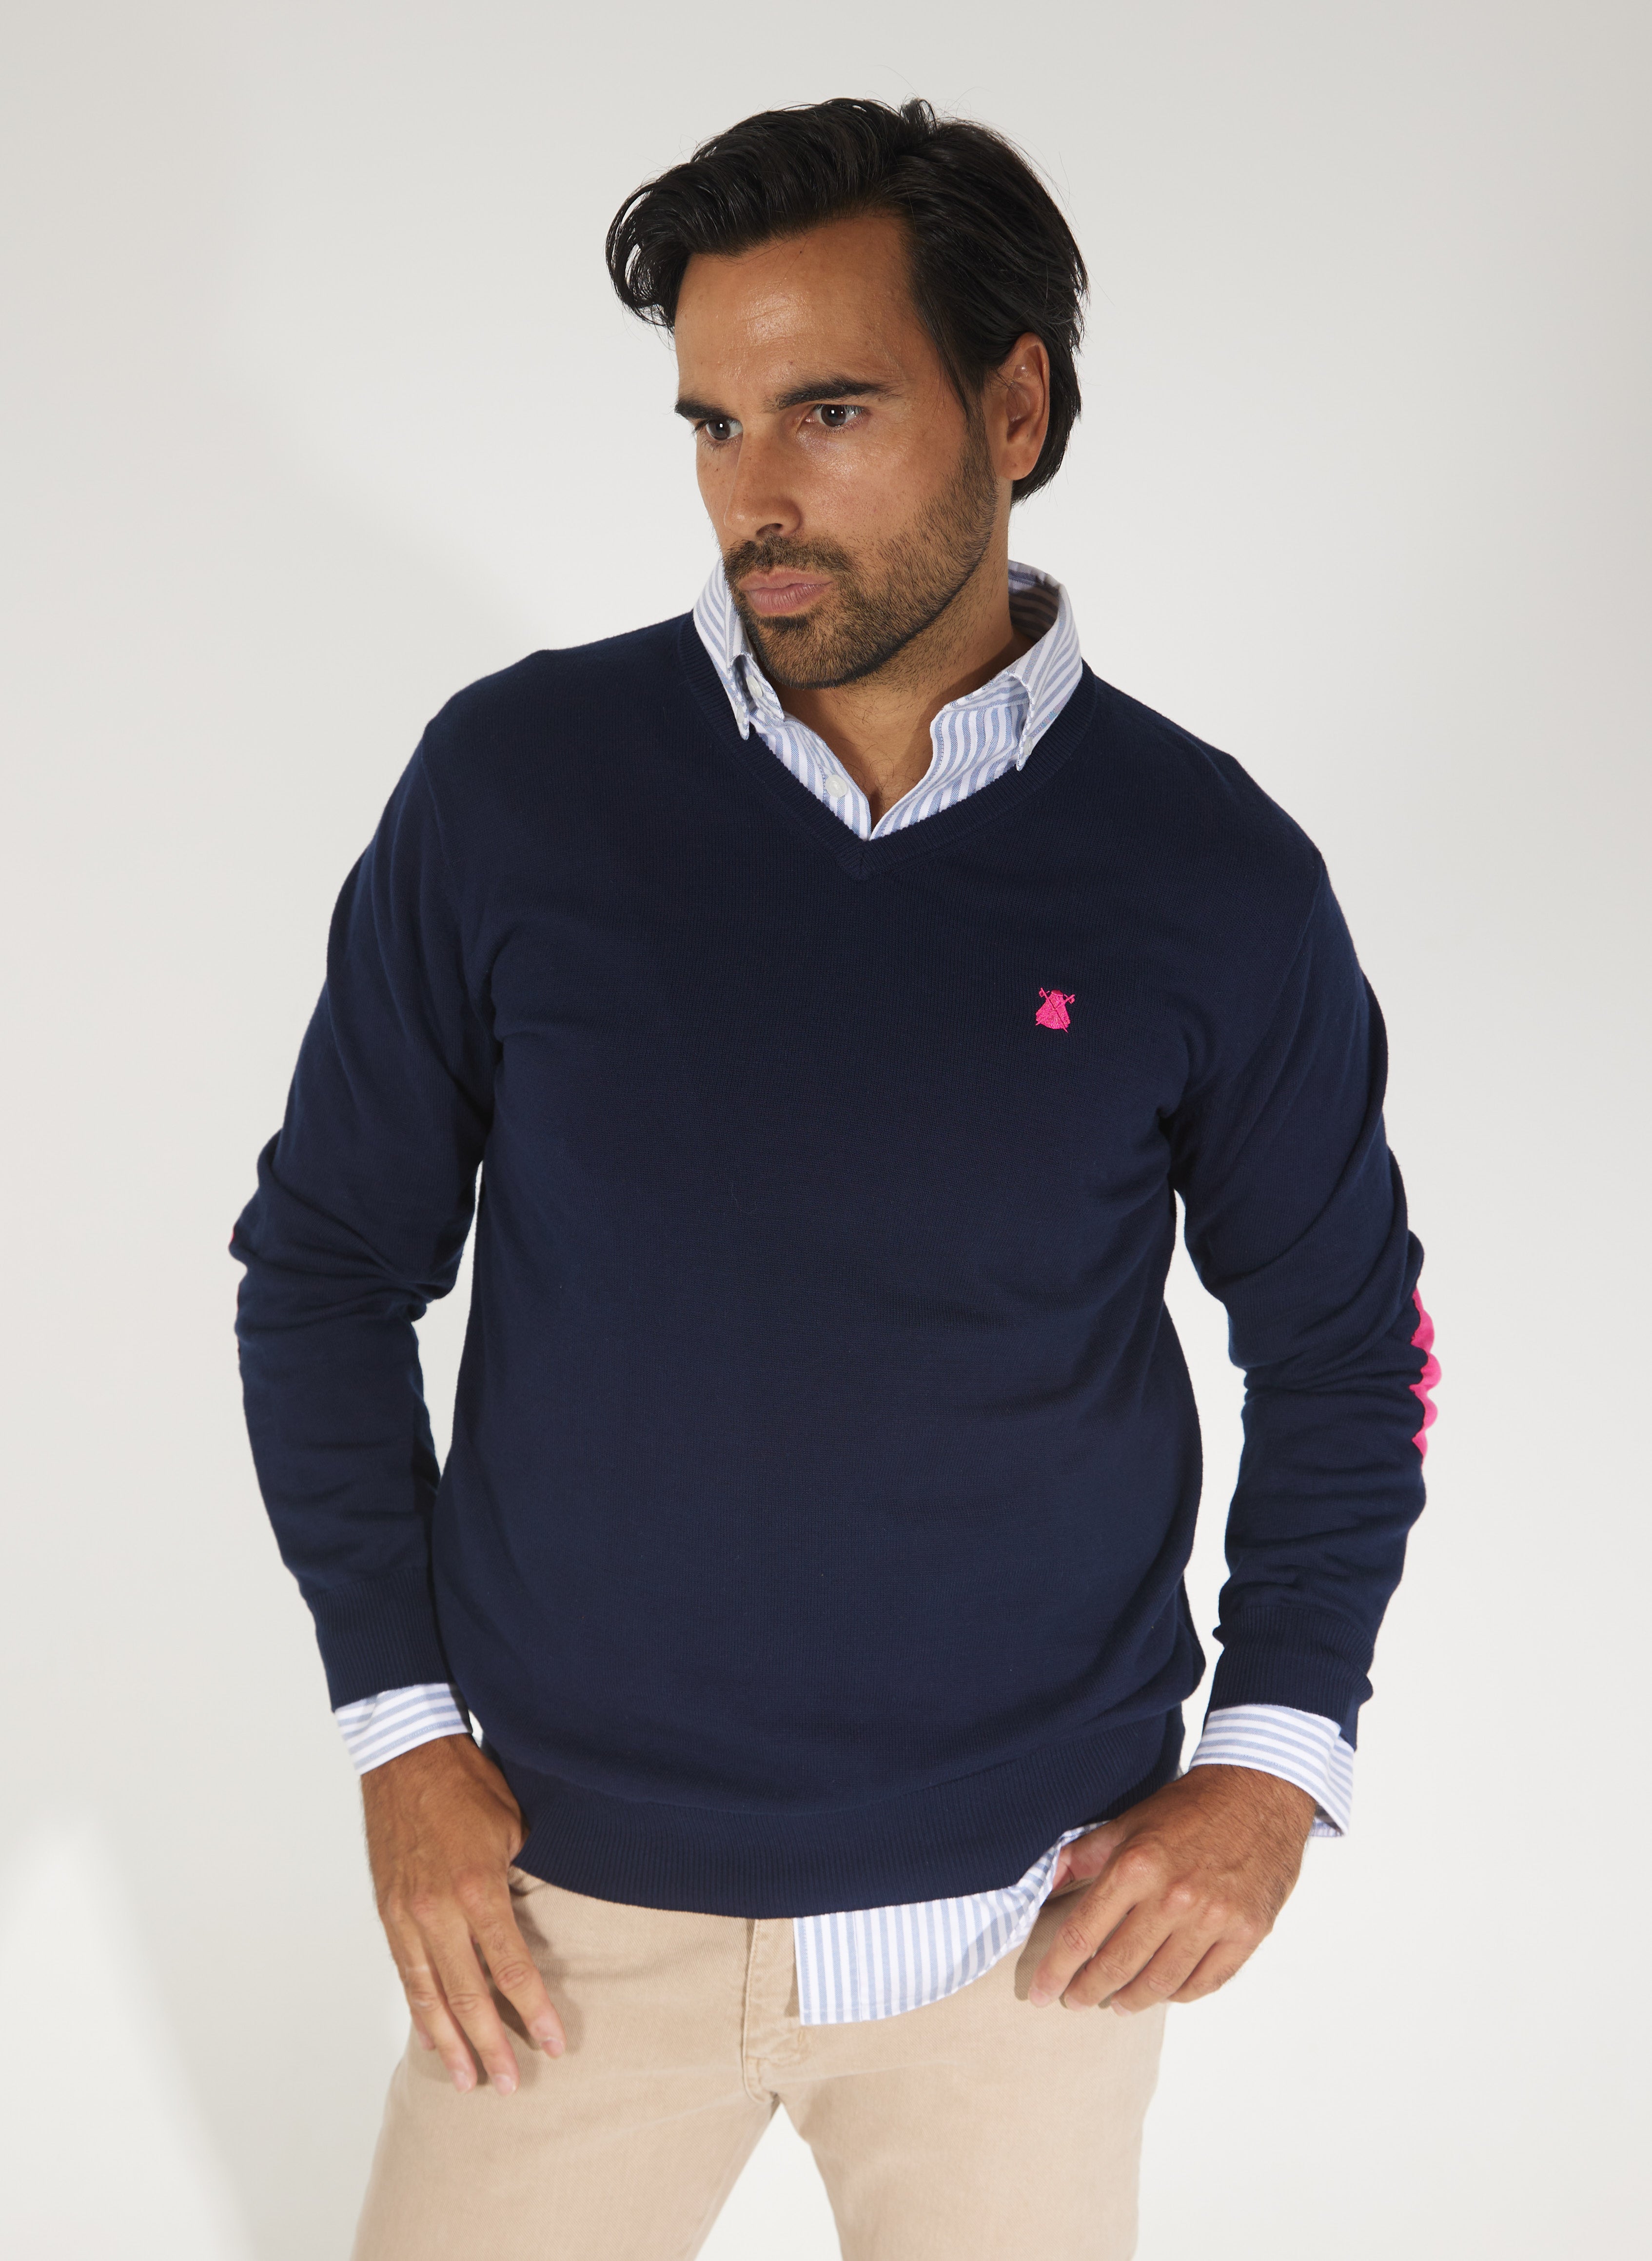 Men's Navy Blue Pink Elbow Patches Sweater